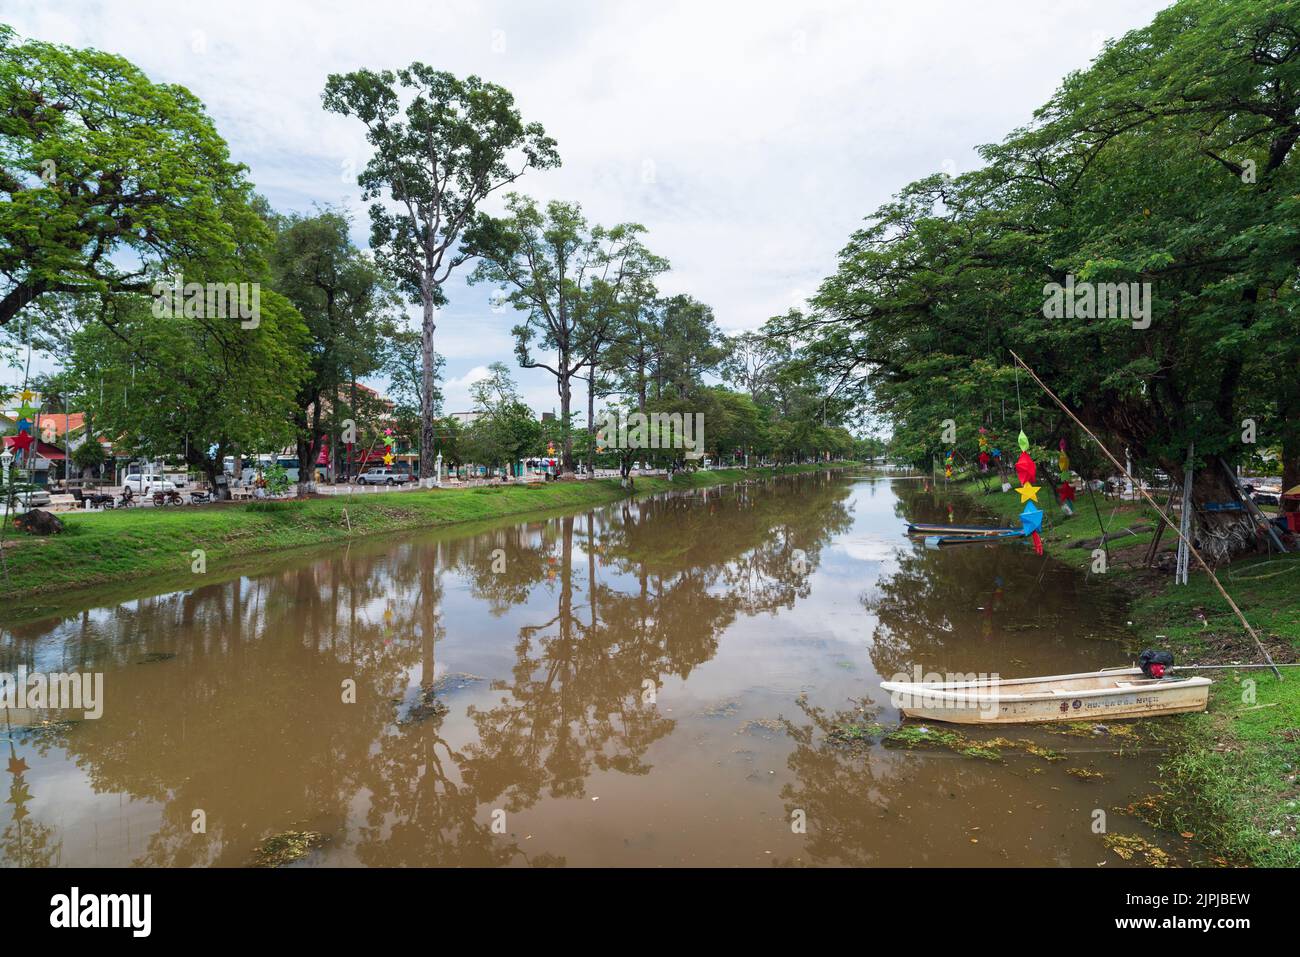 SIEM REAP - CAMBODIA , APRIL 6, 2017. Siem Reap river. The river divides the city in two. Stock Photo